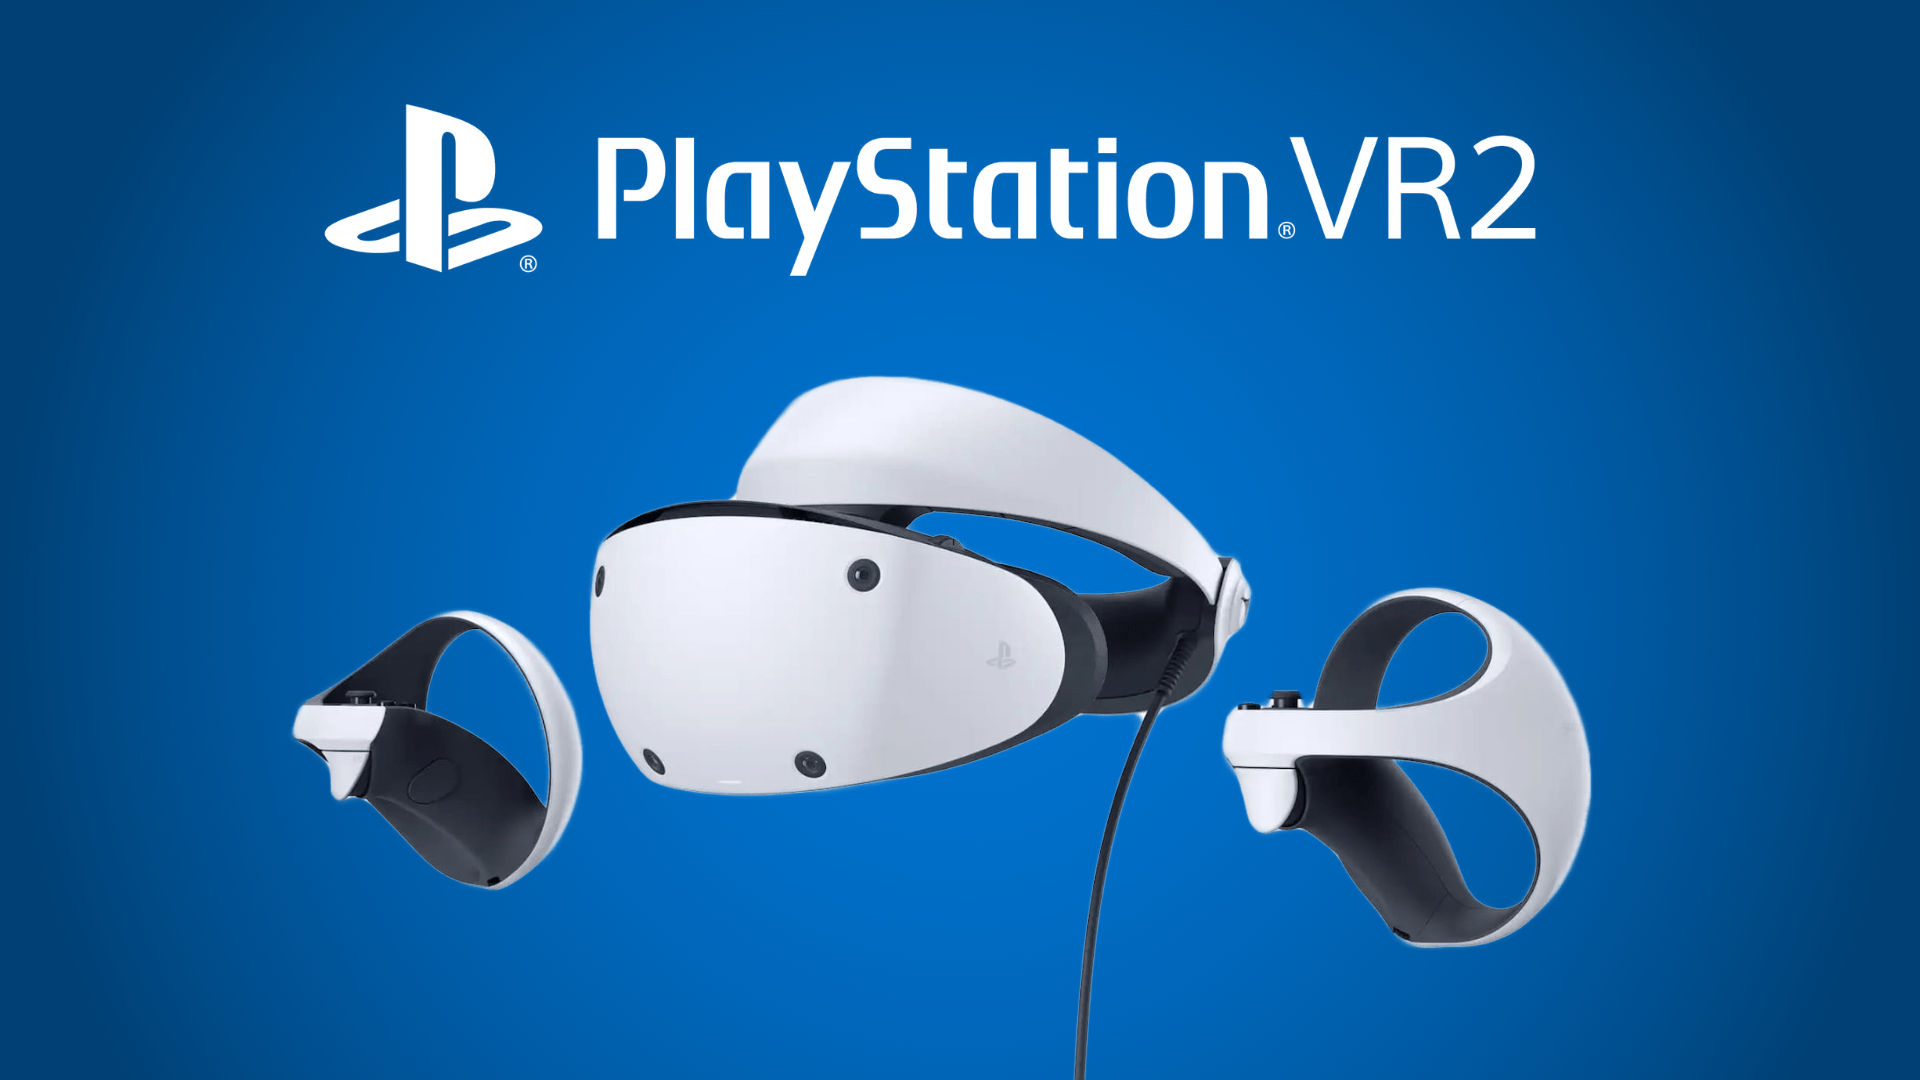 Playstation VR 2: Release, resolution, controller – all you need to know